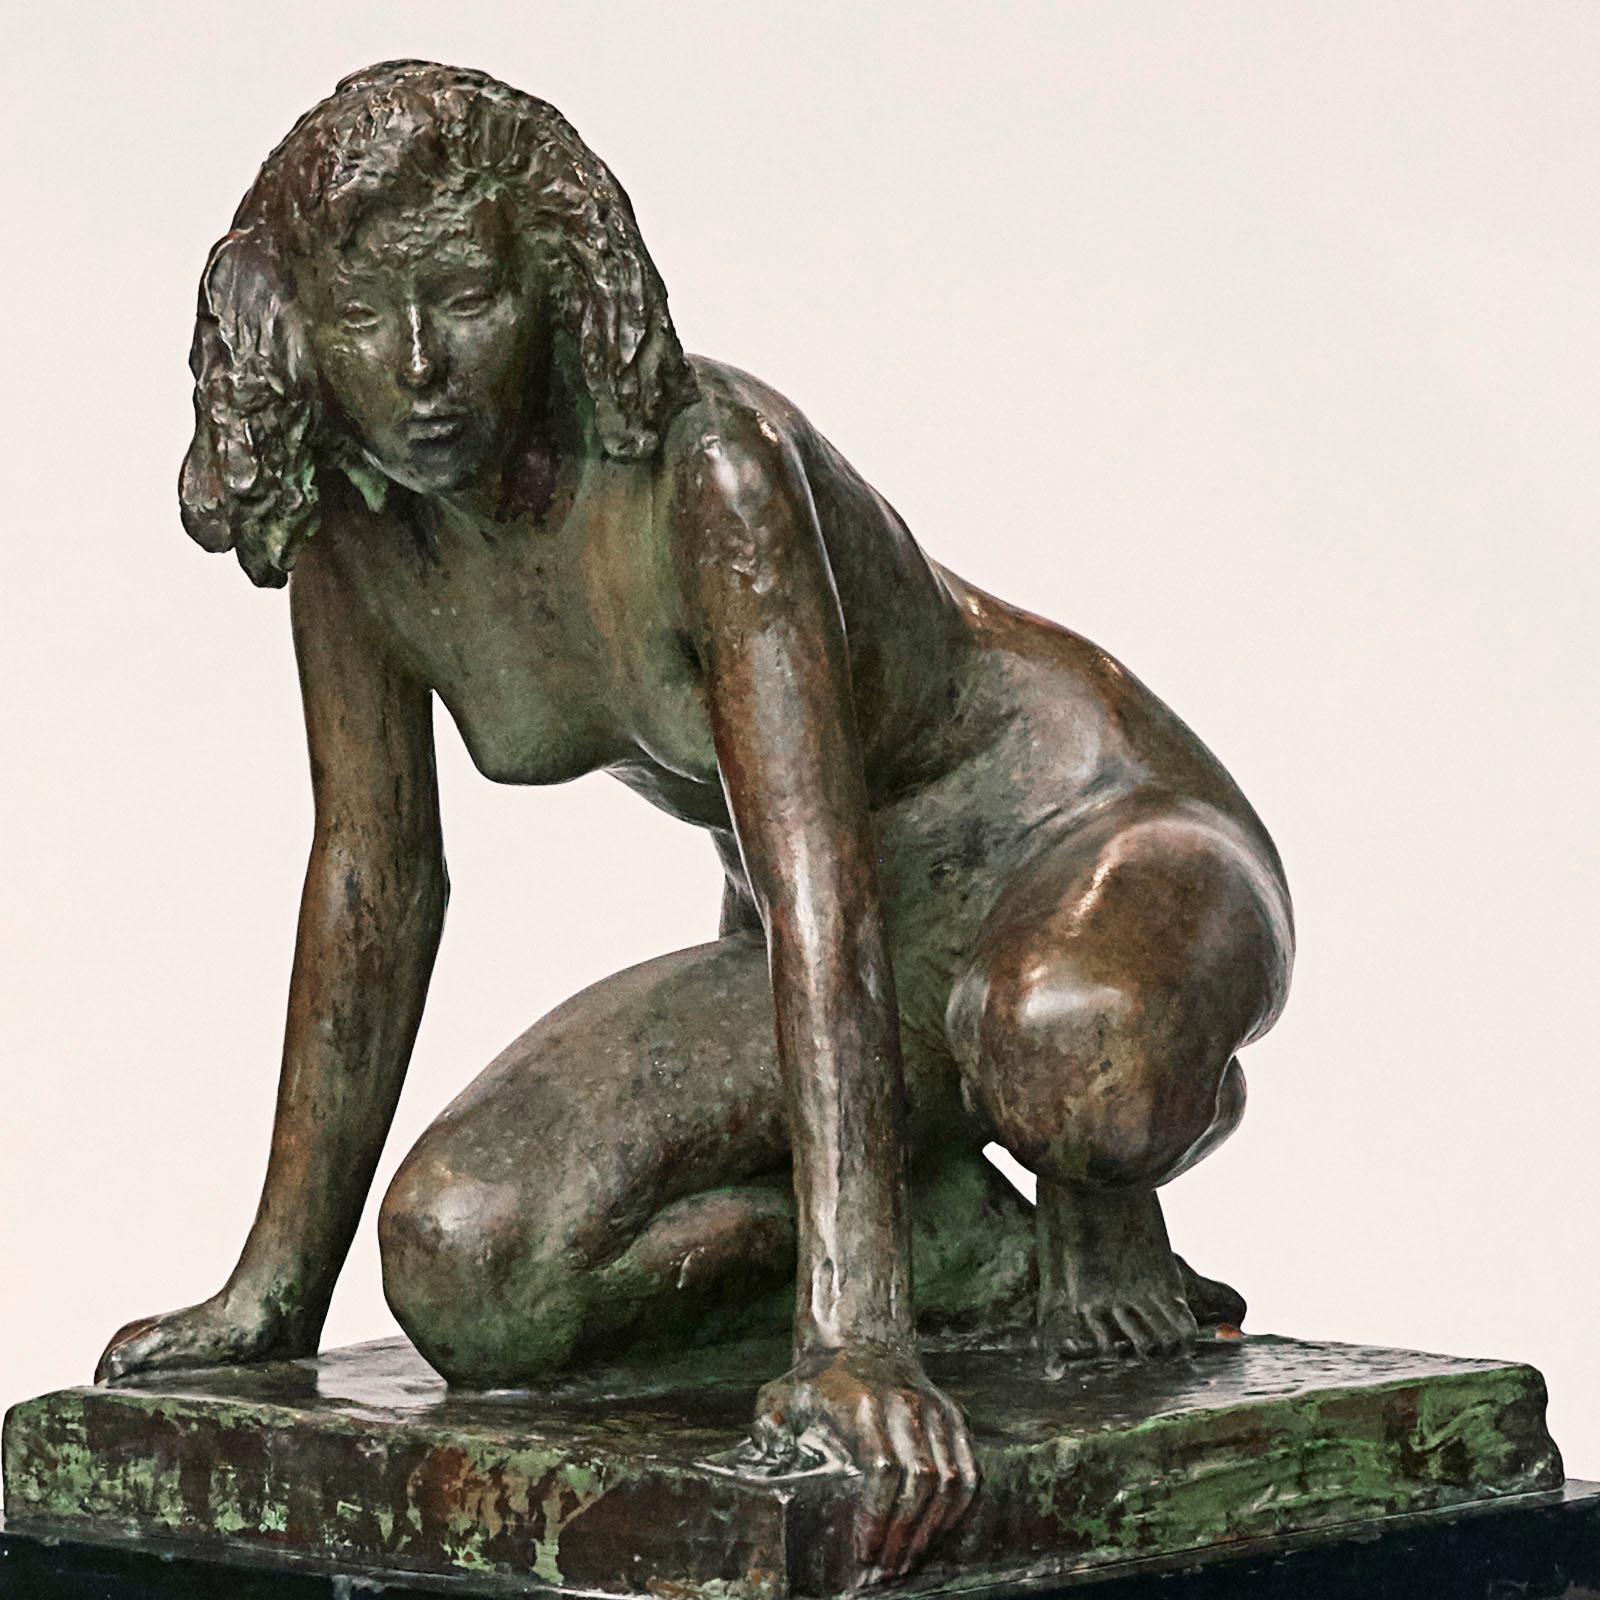 A fine patinated bronze sculpture of a couching women by Mogens Bøggild (1901-1987)
Signed and Monogramed No.4
From the esteemed Copenhagen Foundry Lauritz Rasmussen, 1854-1967.